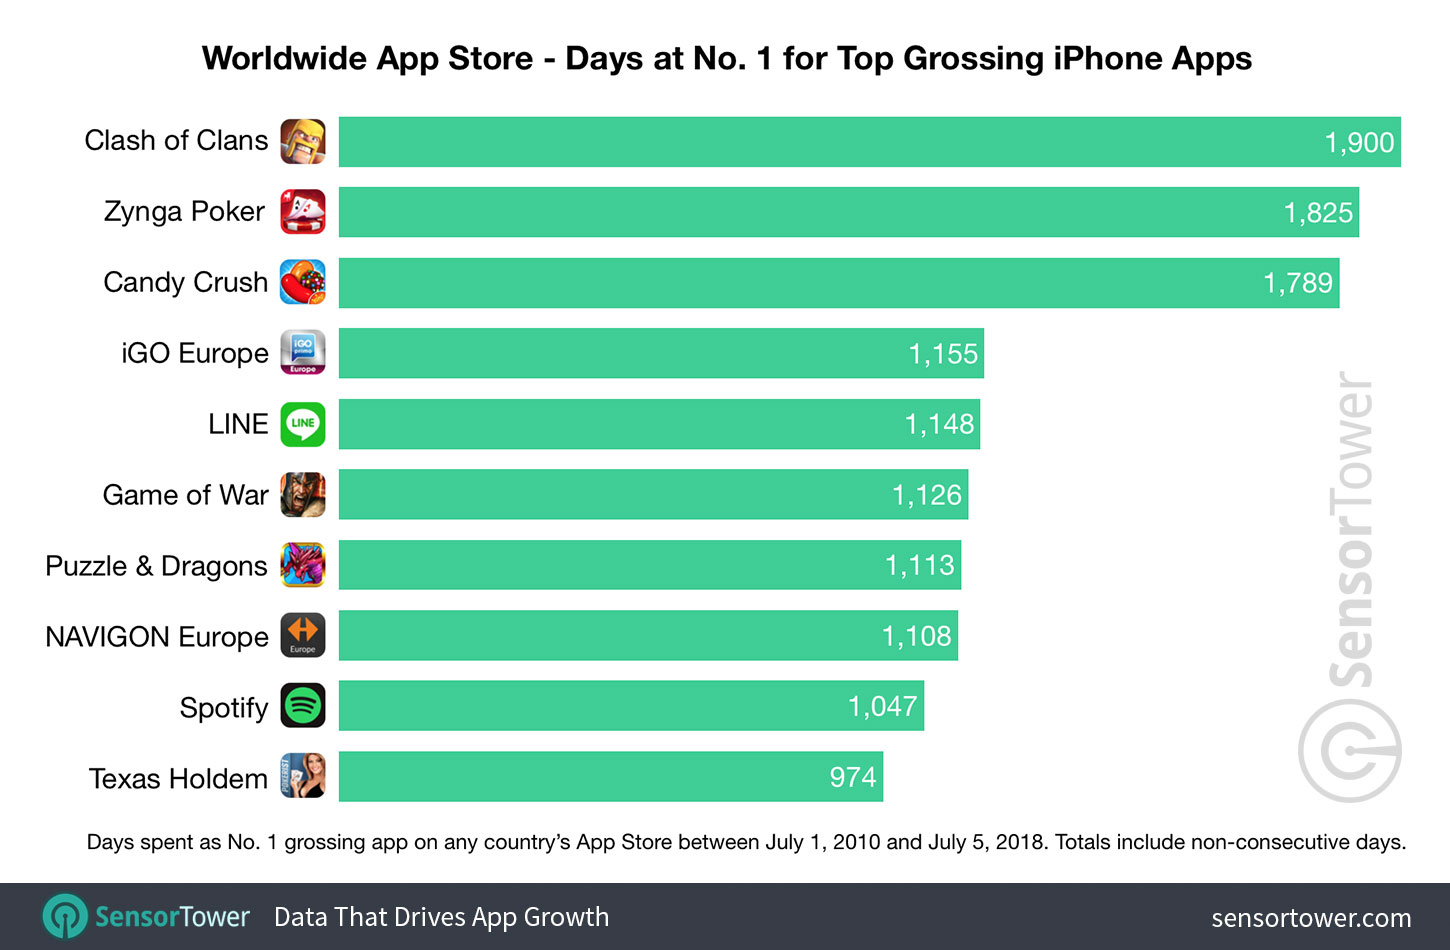 Chart showing a ranking of apps by number of days spent as No. 1 top grossing iPhone app on the Worldwide App Store